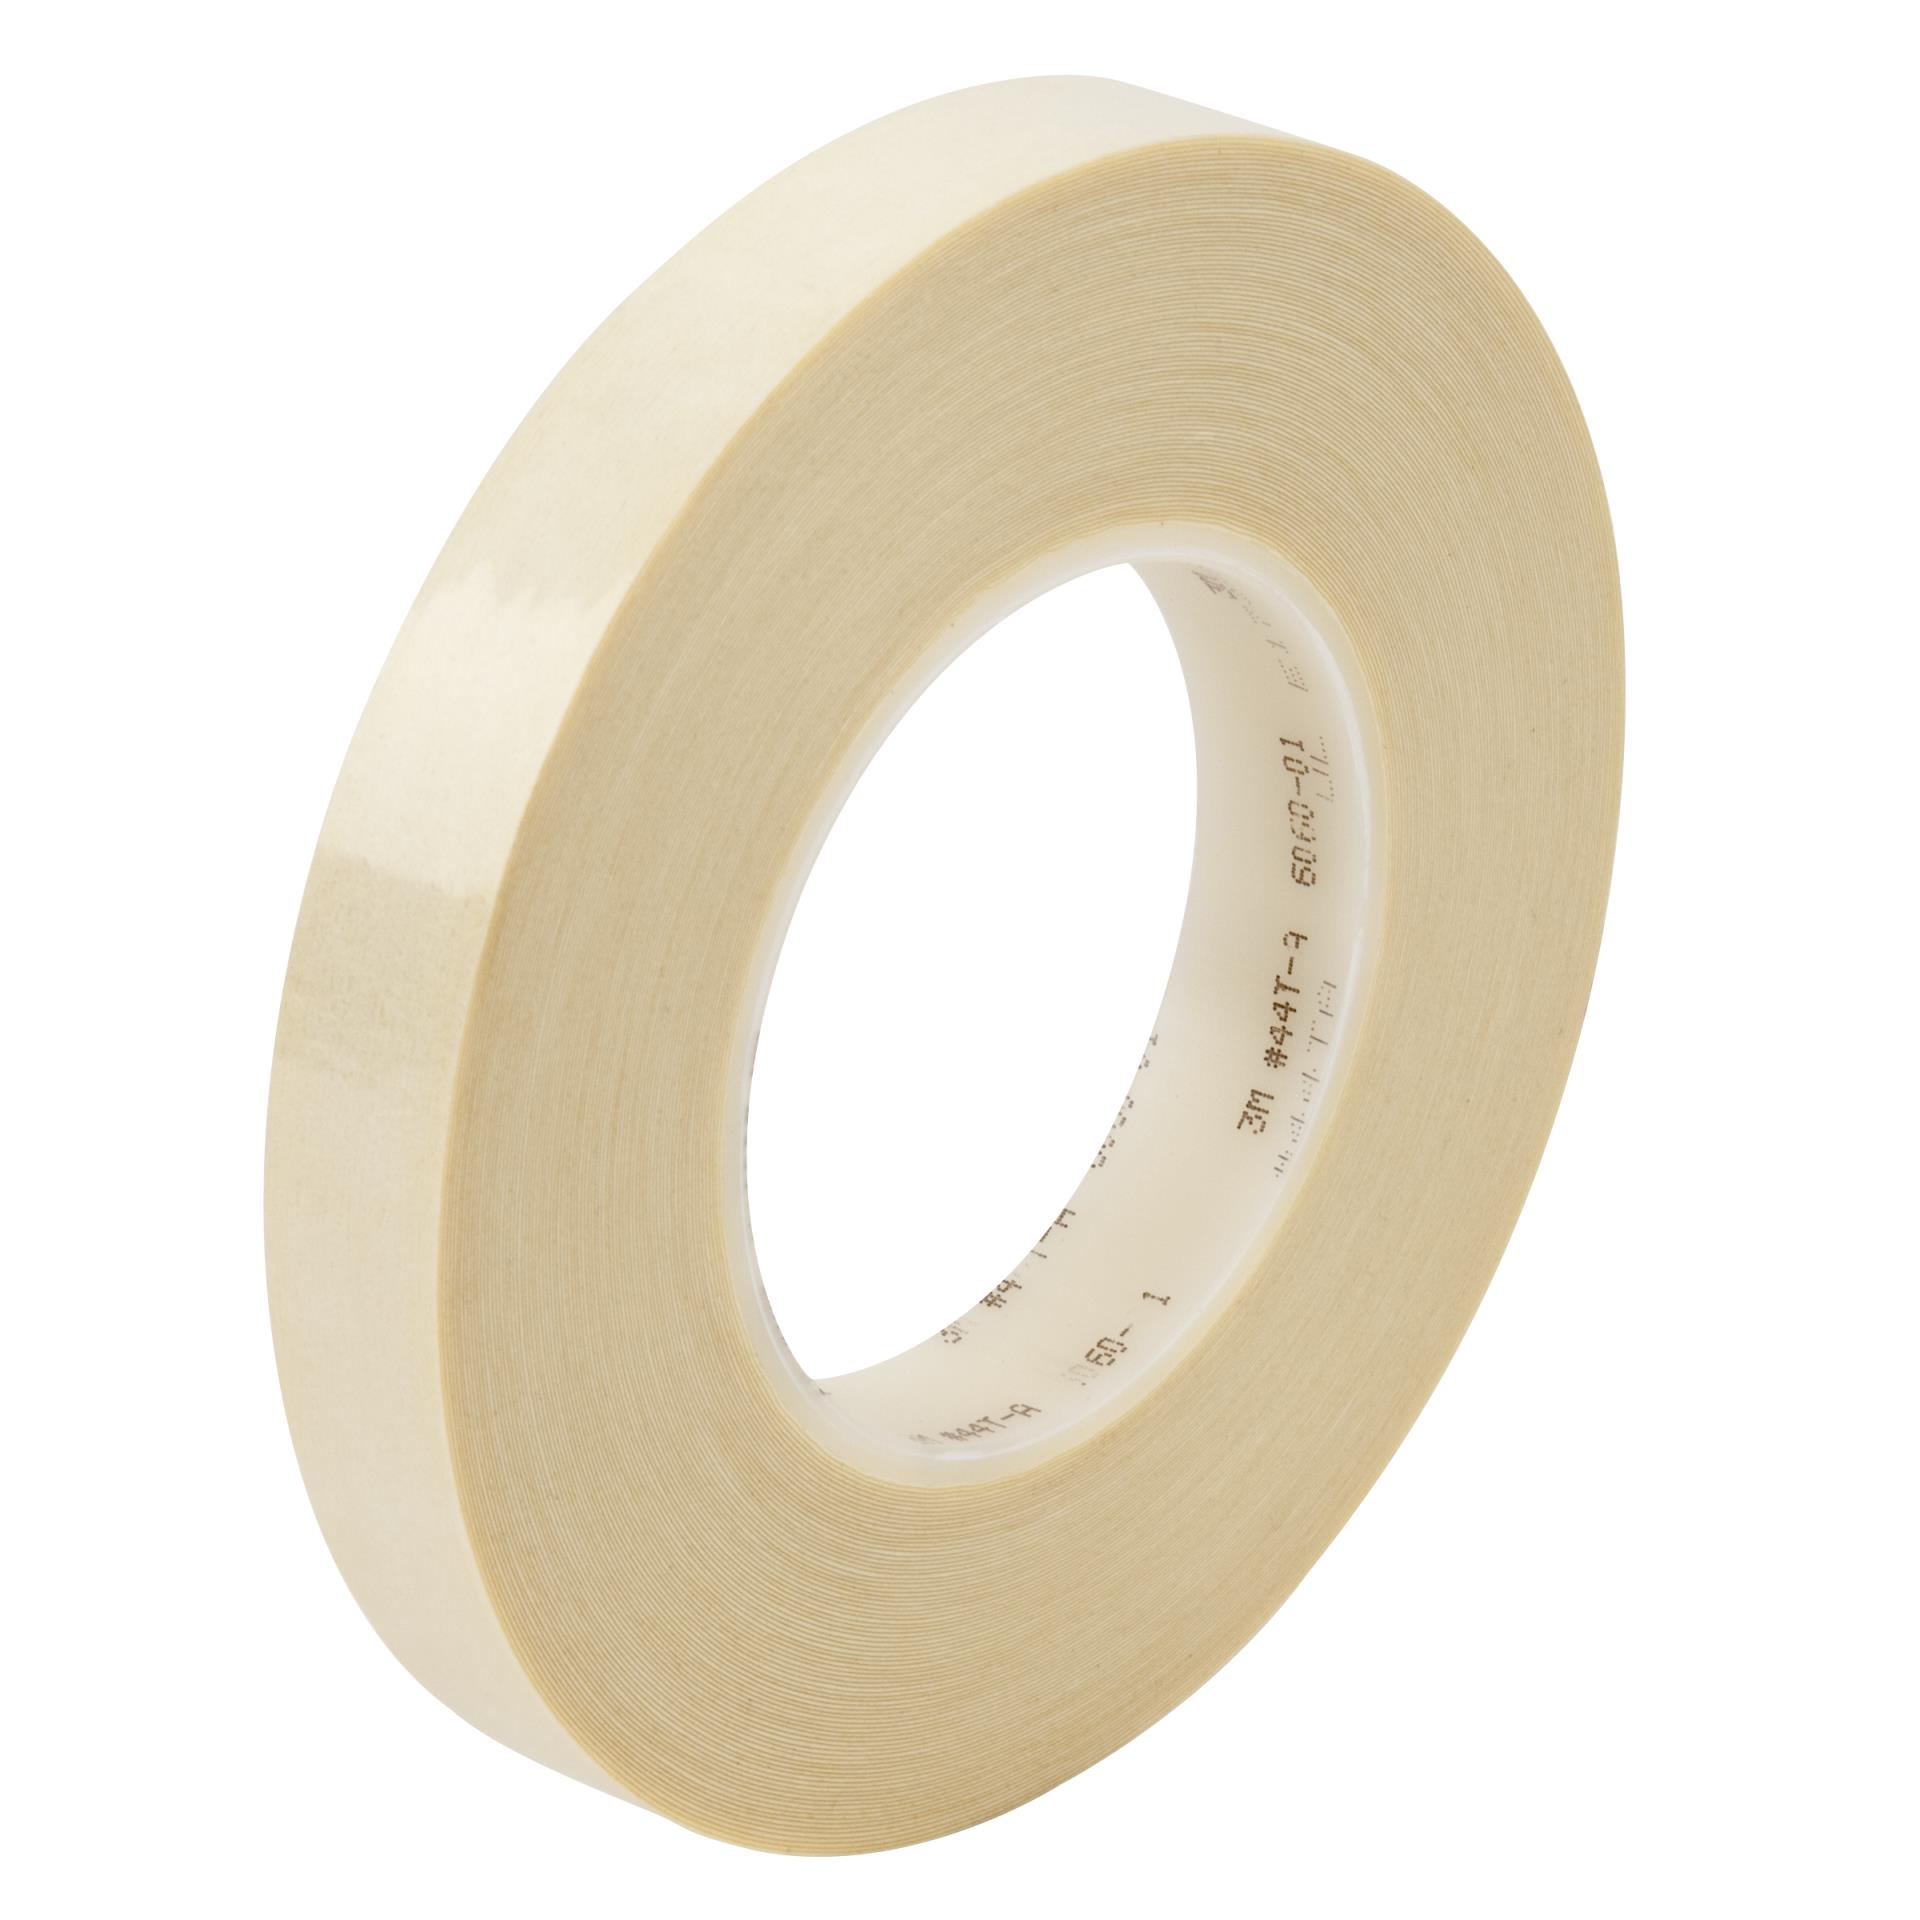 4 Rolls 3M X-Series High Tack Double Coated Tape  XT6110  1/2 in x 36 yd 